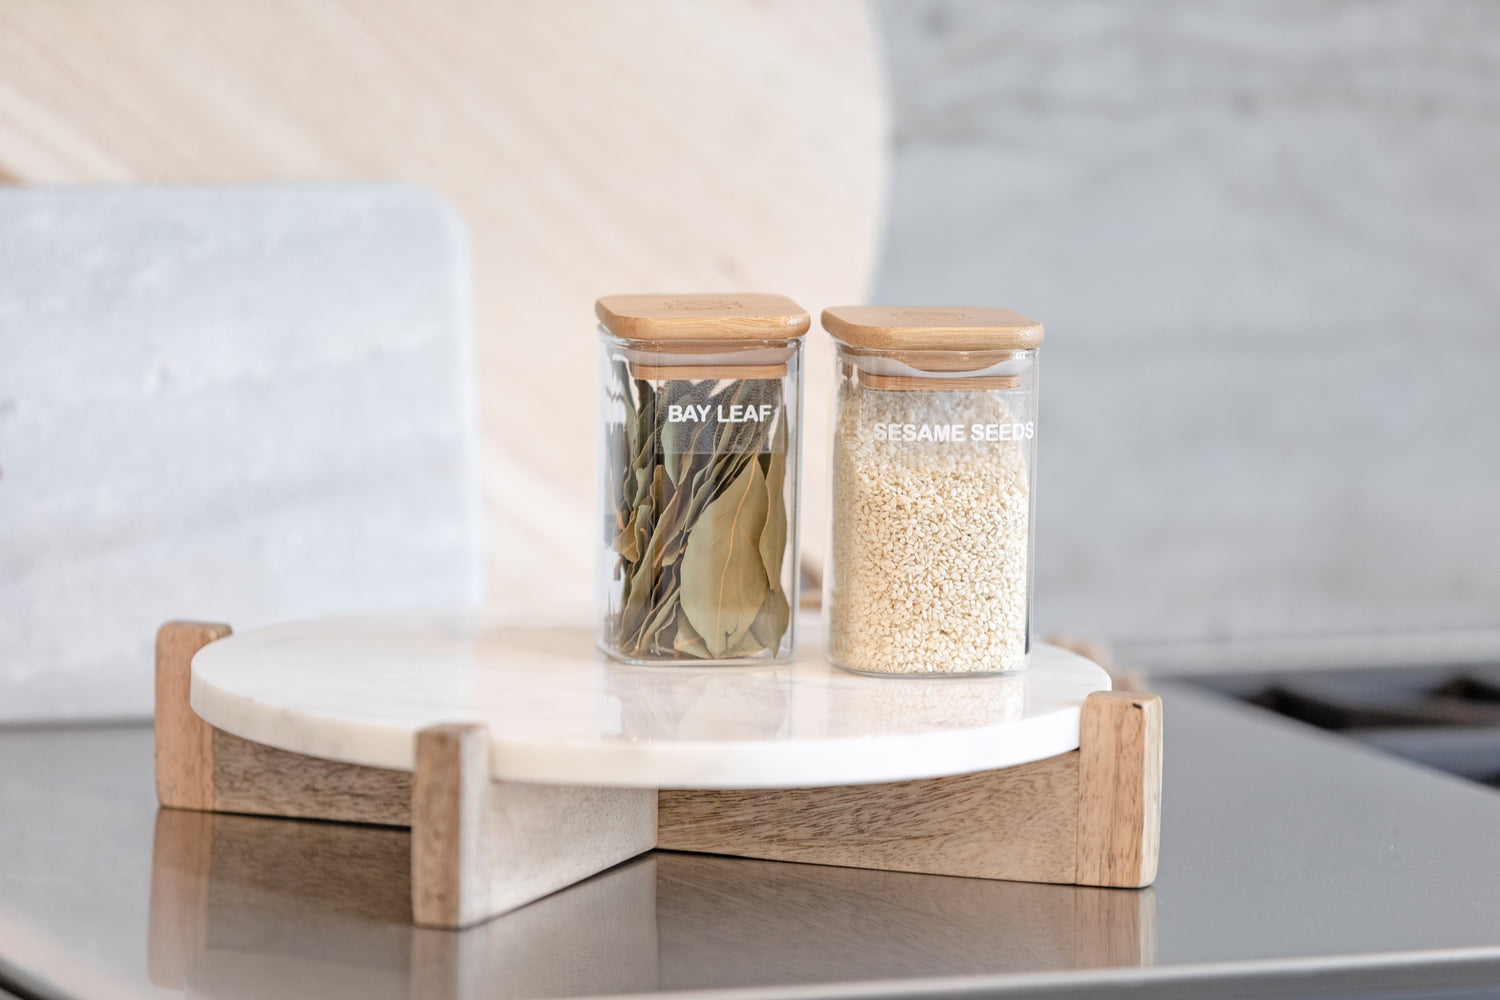 Spice Jars filled with bay leaf and sesame seeds placed on a tray on the countertop.